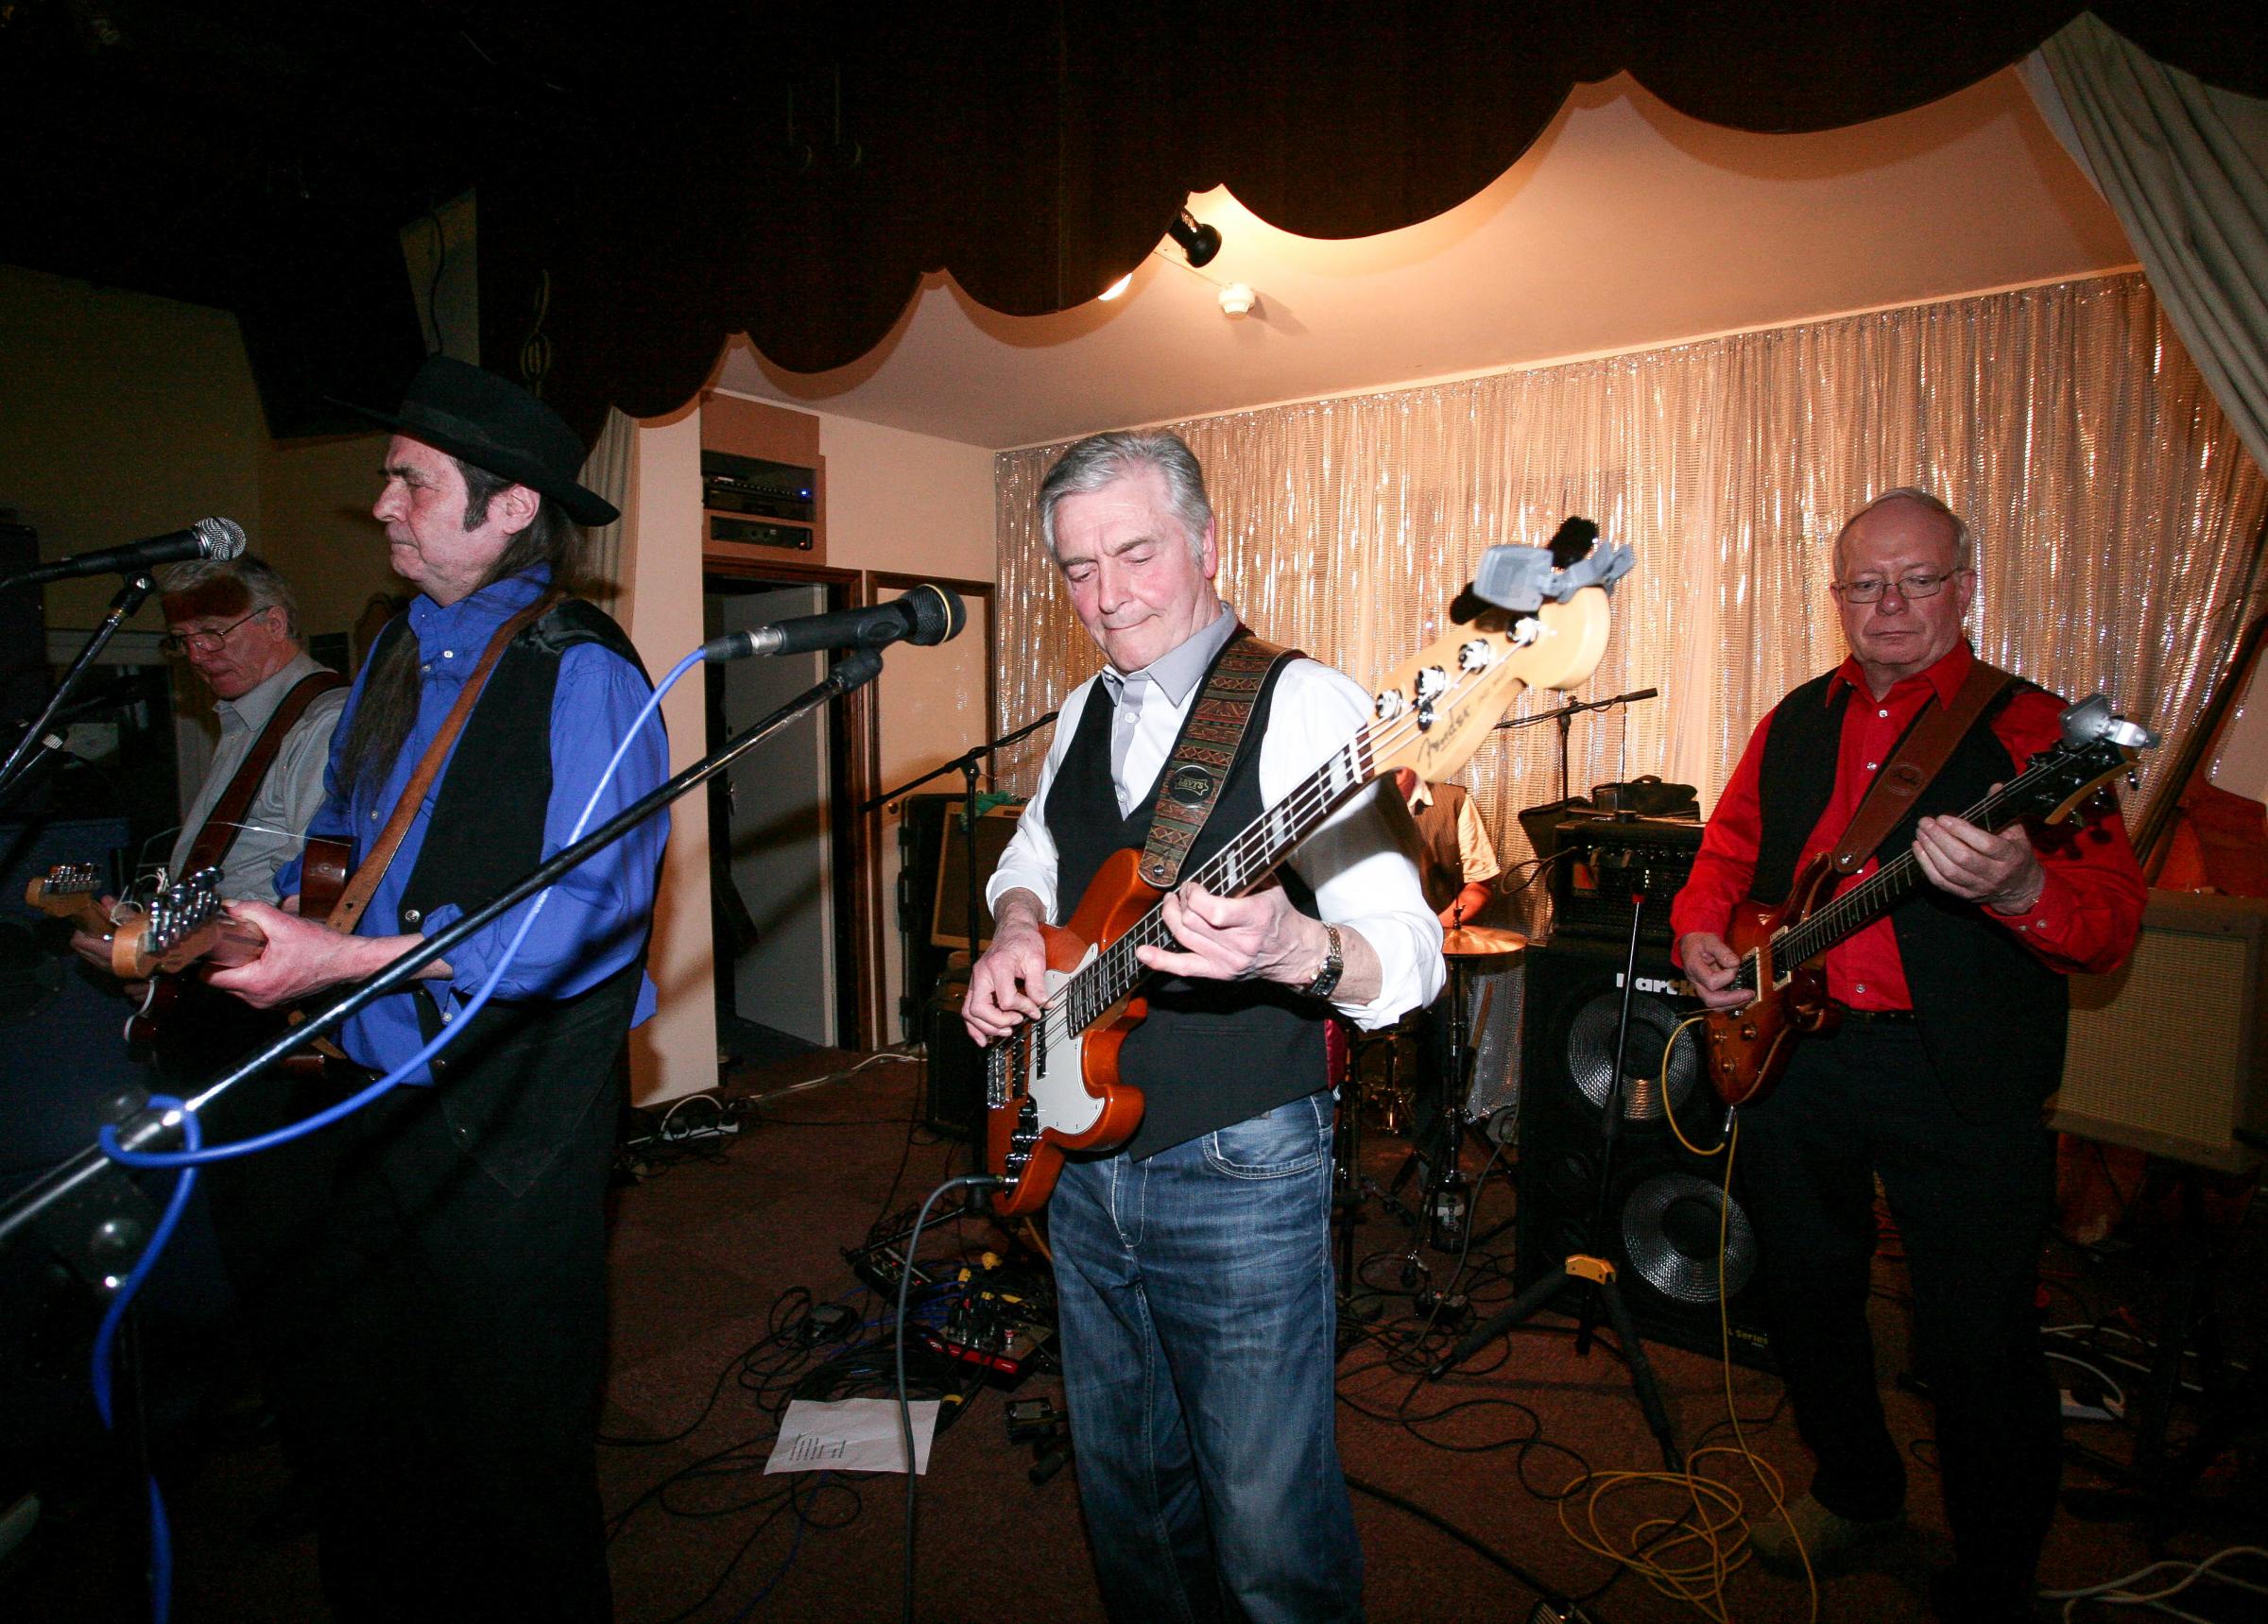 WAA charity night at the Monty Club in Newtown in memory of Gareth Morgan (Badgerman). Pic is. Playing bass guitar for The Trensetts is Gwyn Davies. RD135_2013-1